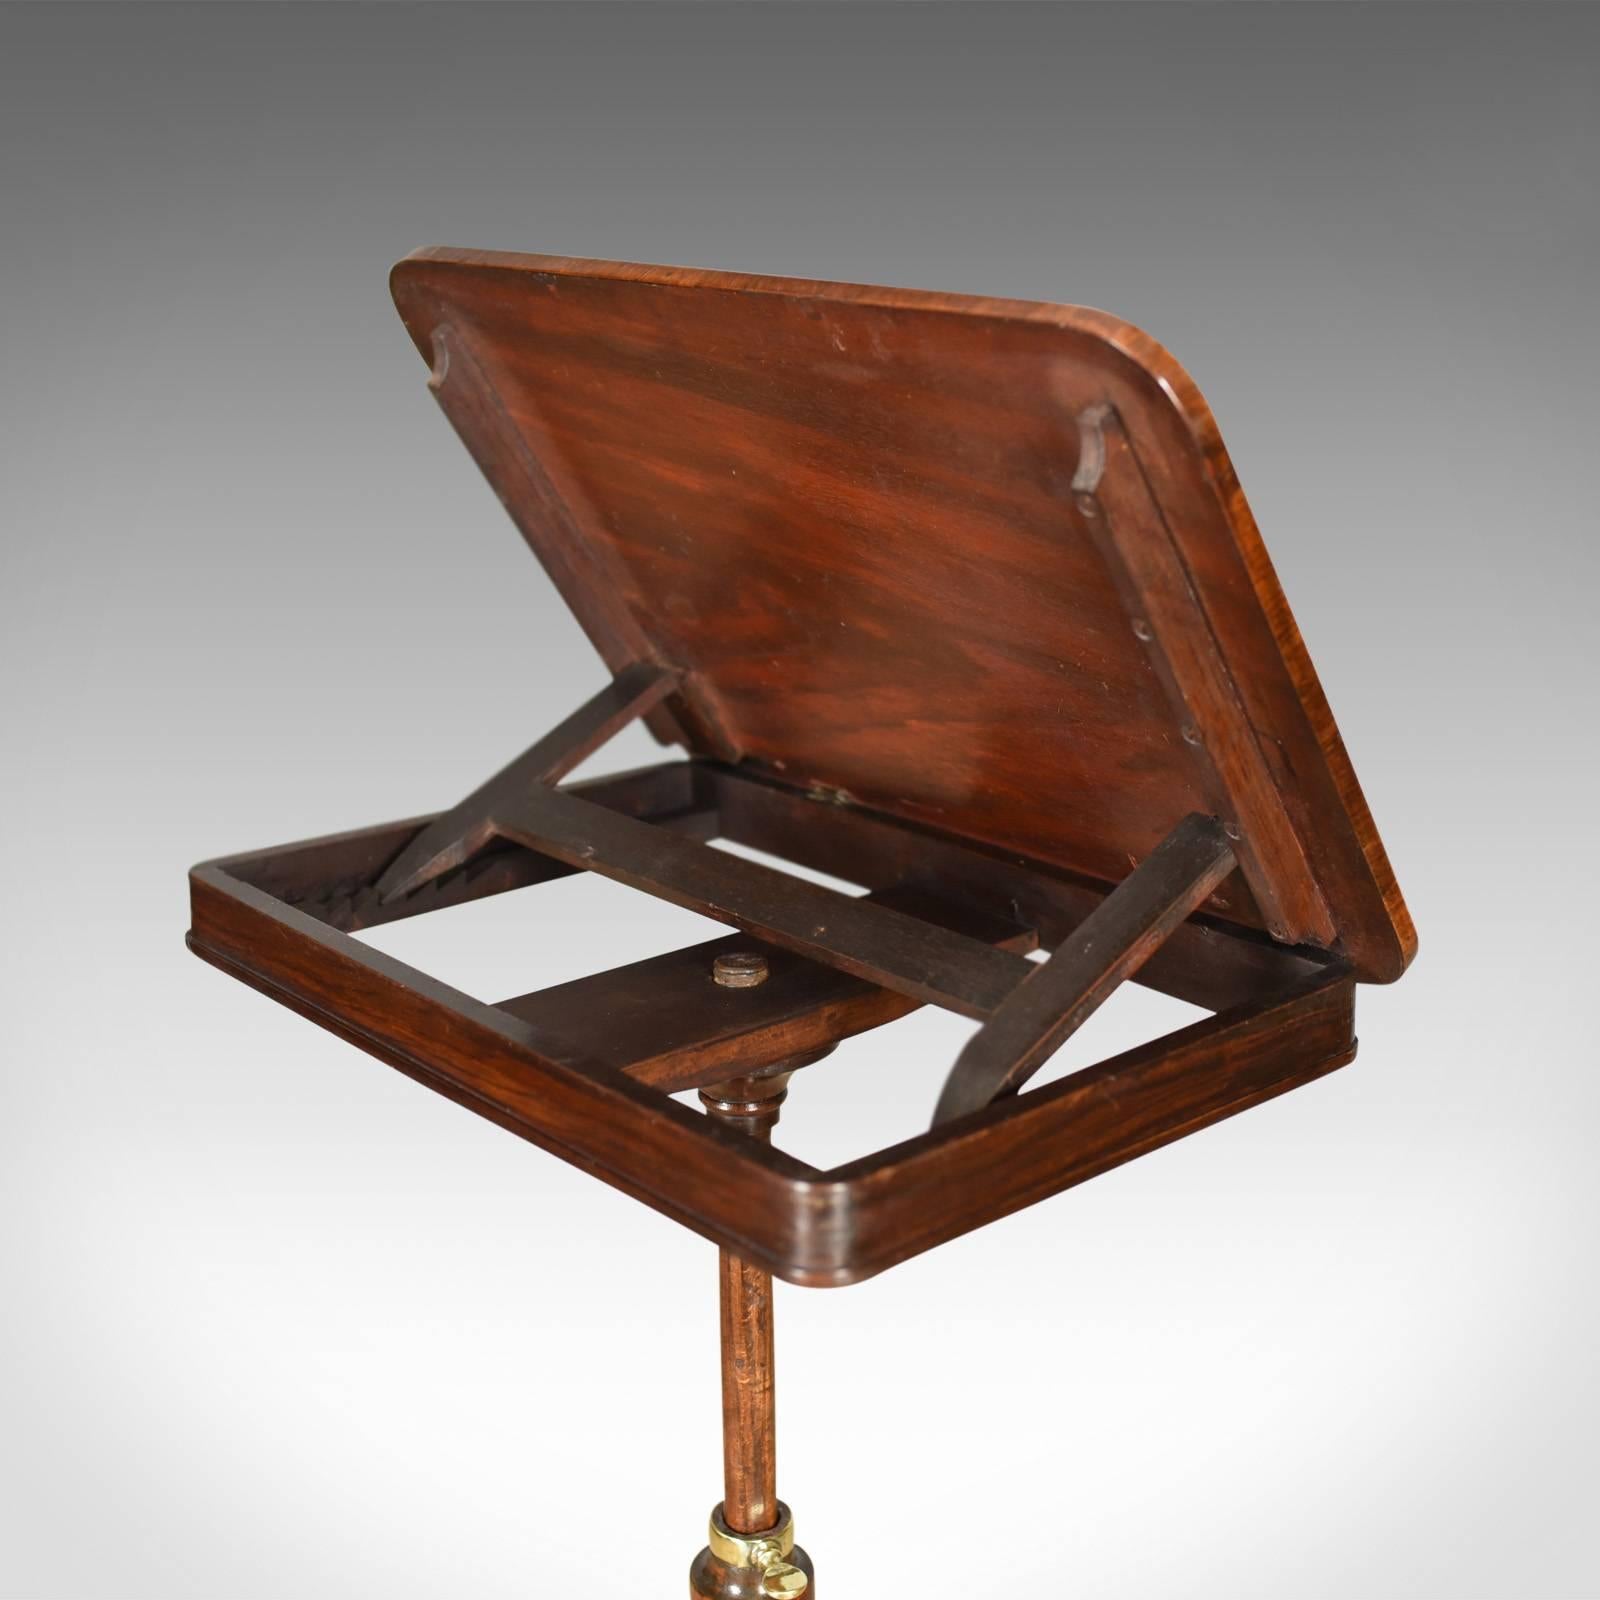 Antique Music Stand, English, Regency, Adjustable, Rosewood, Lectern, circa 1820 1